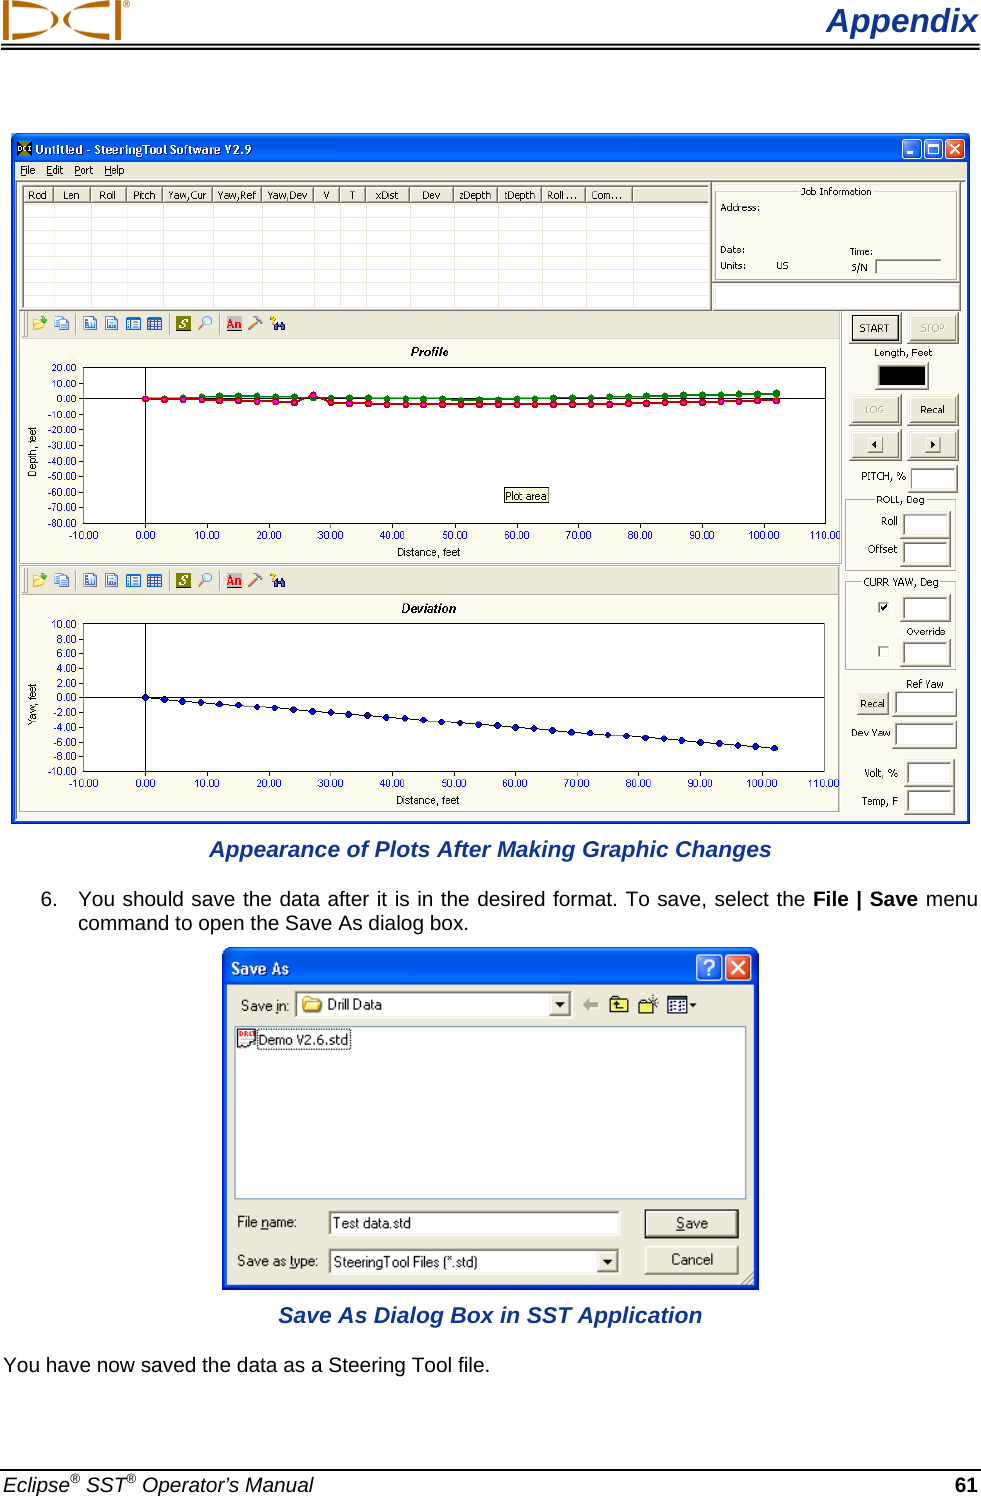  Appendix  Appearance of Plots After Making Graphic Changes 6.  You should save the data after it is in the desired format. To save, select the File | Save menu command to open the Save As dialog box.  Save As Dialog Box in SST Application You have now saved the data as a Steering Tool file.   Eclipse® SST® Operator’s Manual  61 